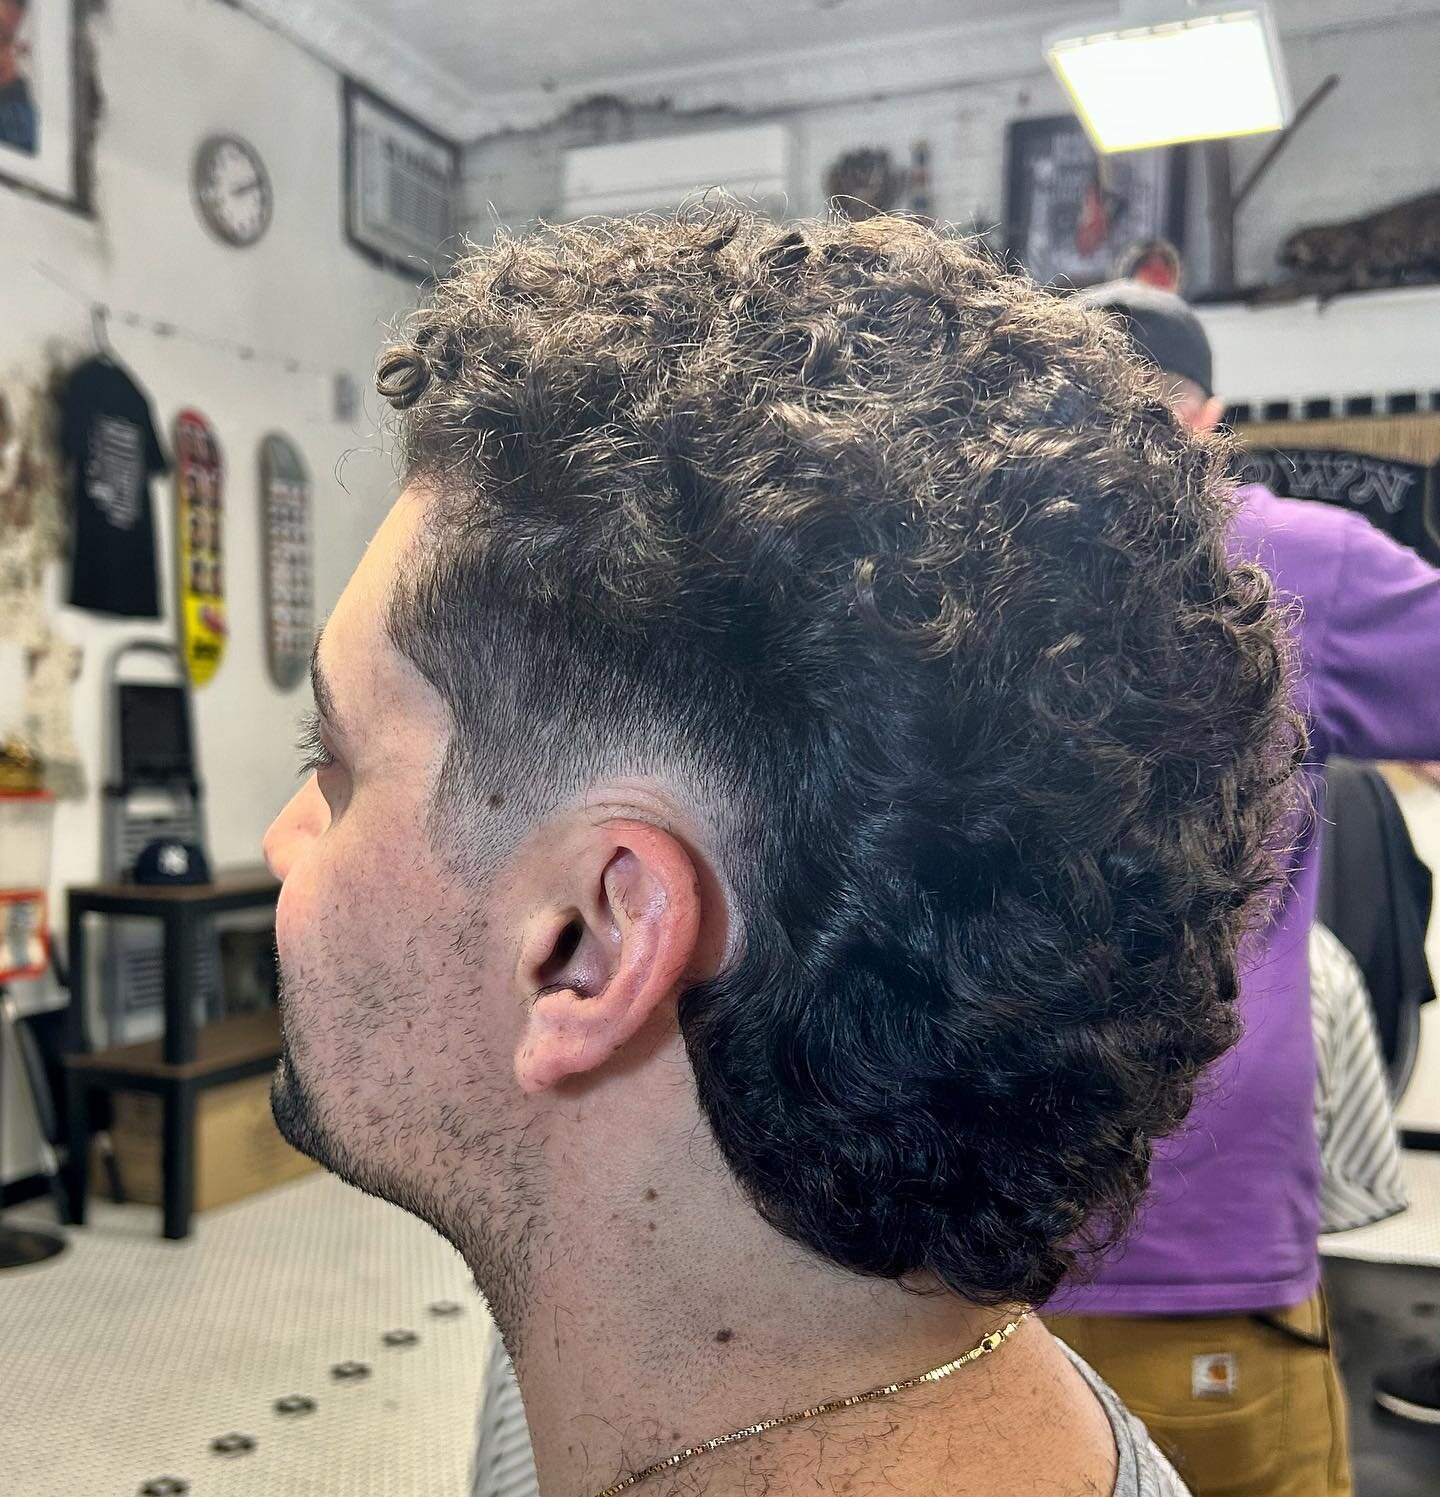 Mullet game strong 💪🏽 @sc0oteratcrown .
.
.
.
.

.
.
#crownbarbers #pittsburgh #garfield #menscuts #shorthair #fade #fades #clippercut #friendship #eastend #eastendpittsburgh #eastliberty #scuccimane #scooter #skateboards #crown #crownbarber #baldf